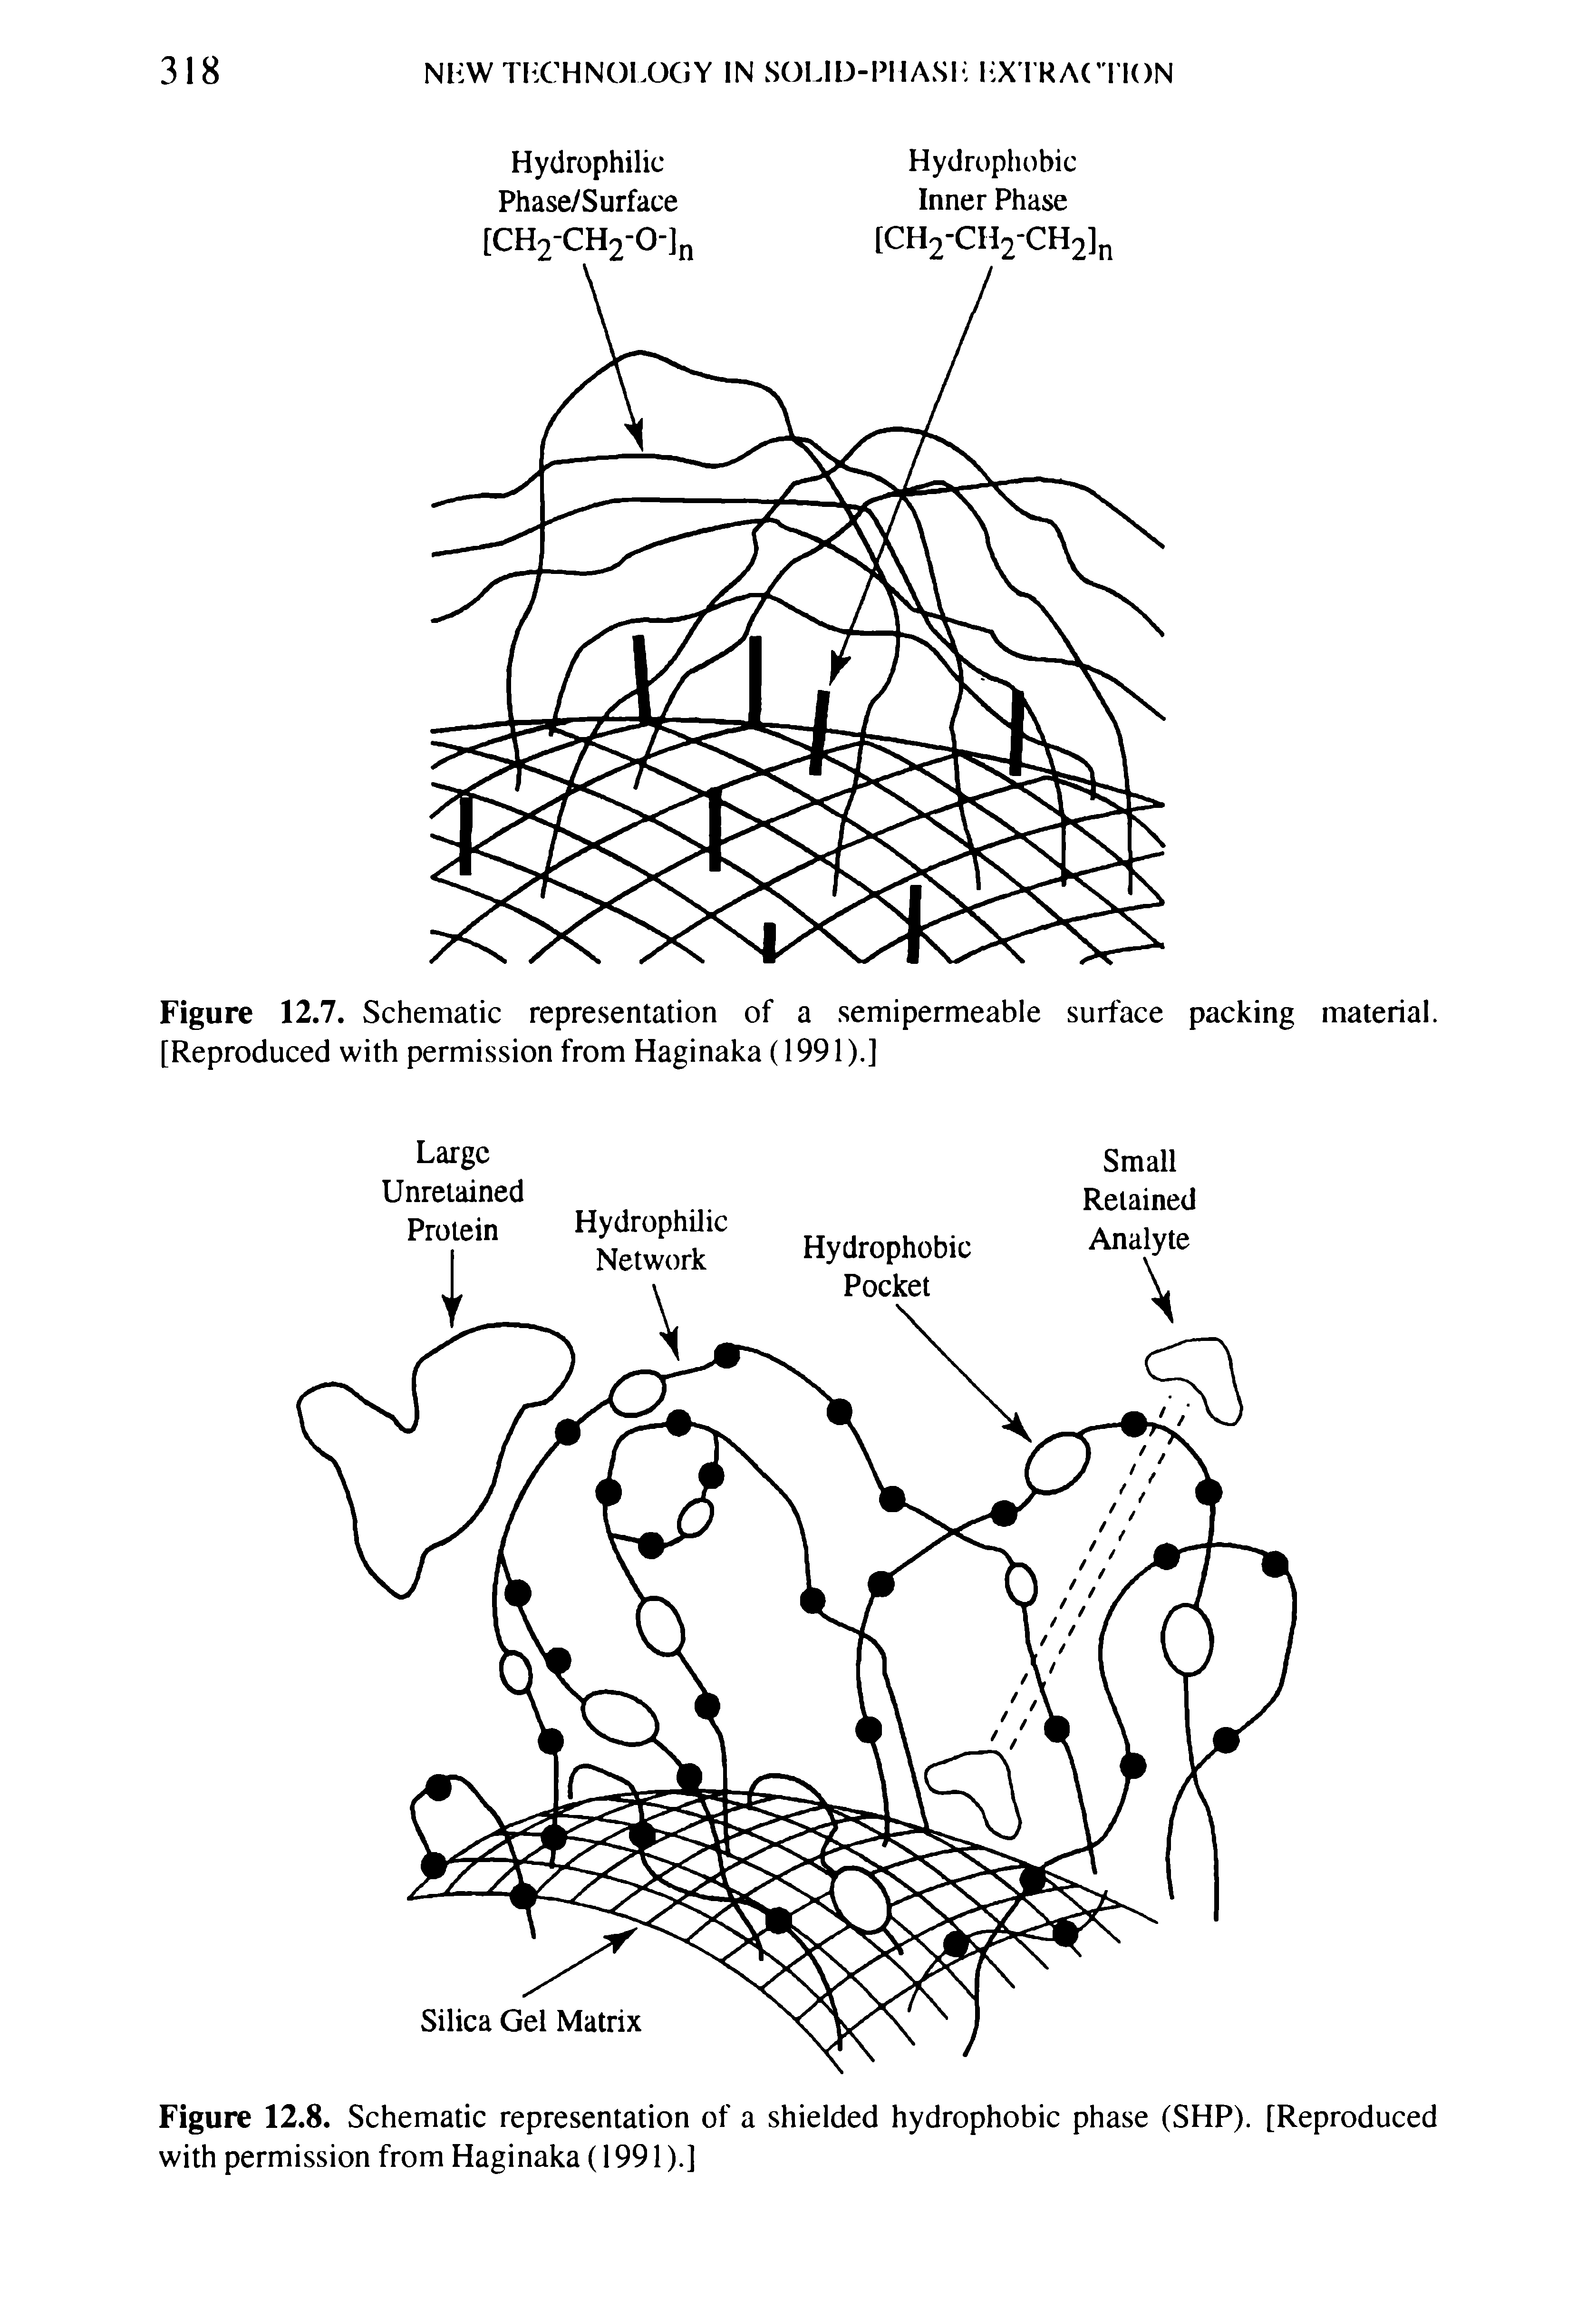 Figure 12.8. Schematic representation of a shielded hydrophobic phase (SHP). [Reproduced with permission from Haginaka (1991).]...